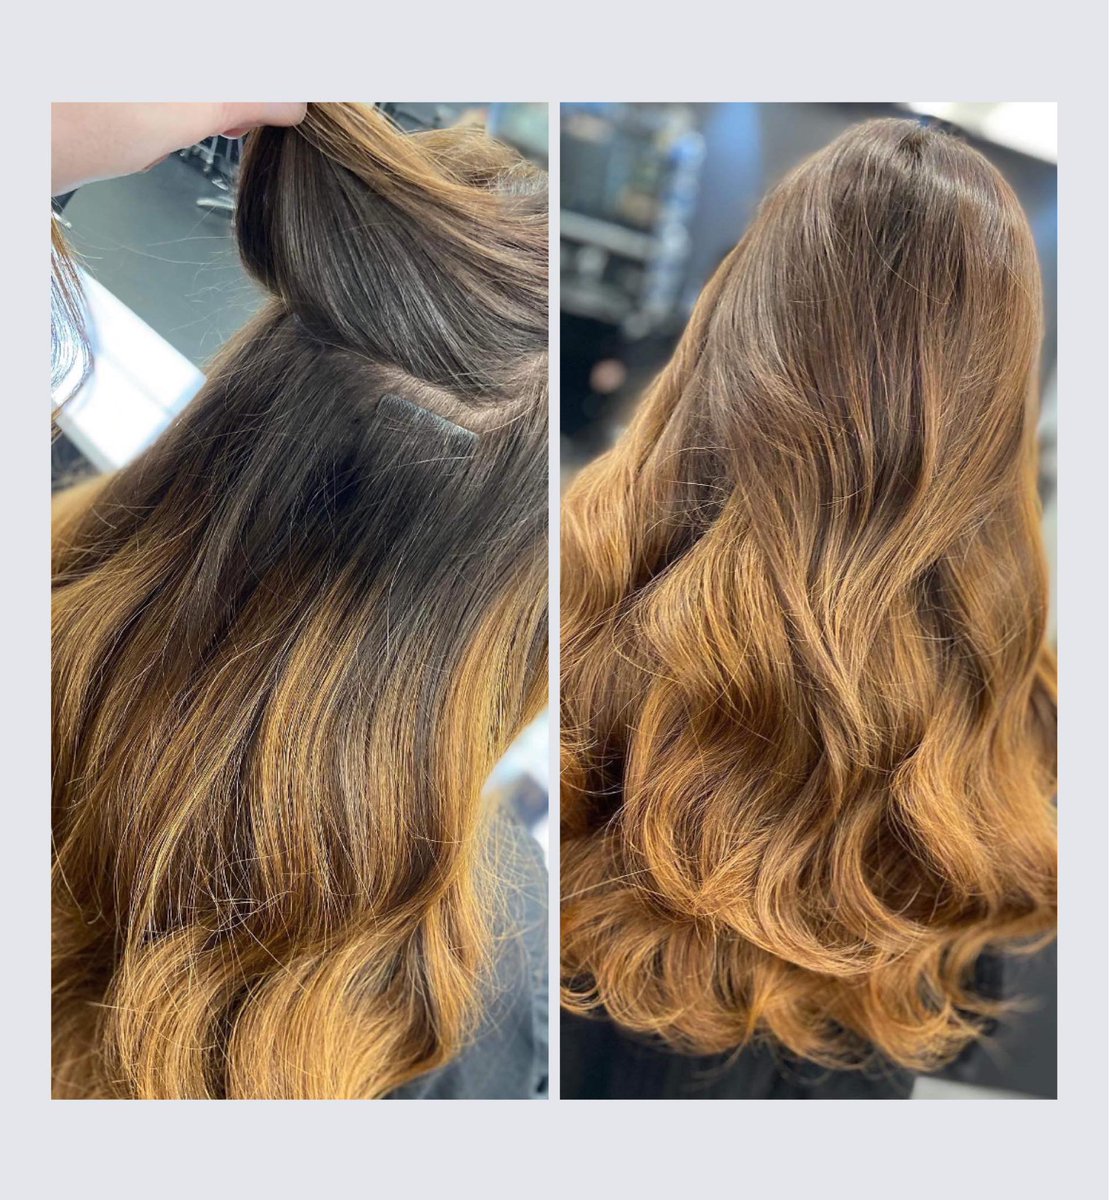 Just a glimpse of some of The Hair Lounge work, I think we can agree how amazing it is. Call 01704 542161 to book a consultation,